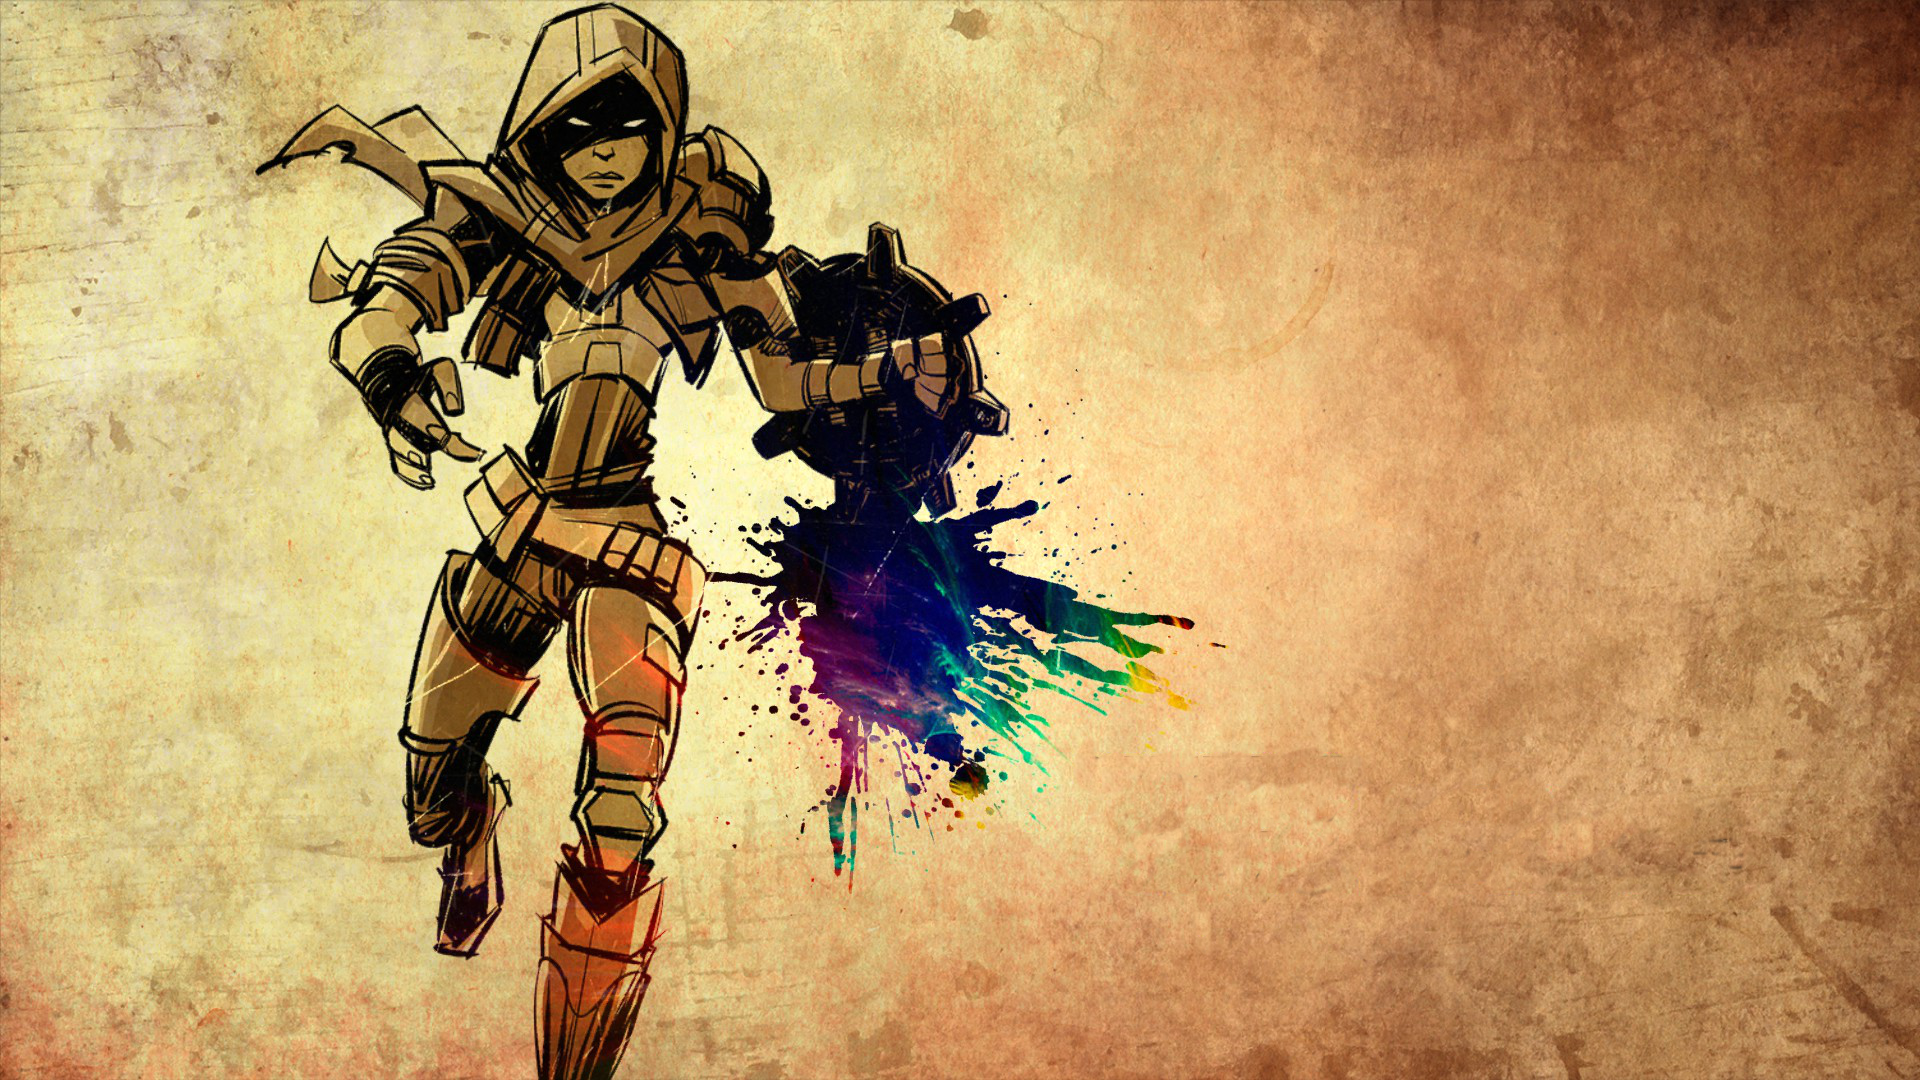 Tales from the Borderlands Wallpaper : Athena - Imgur